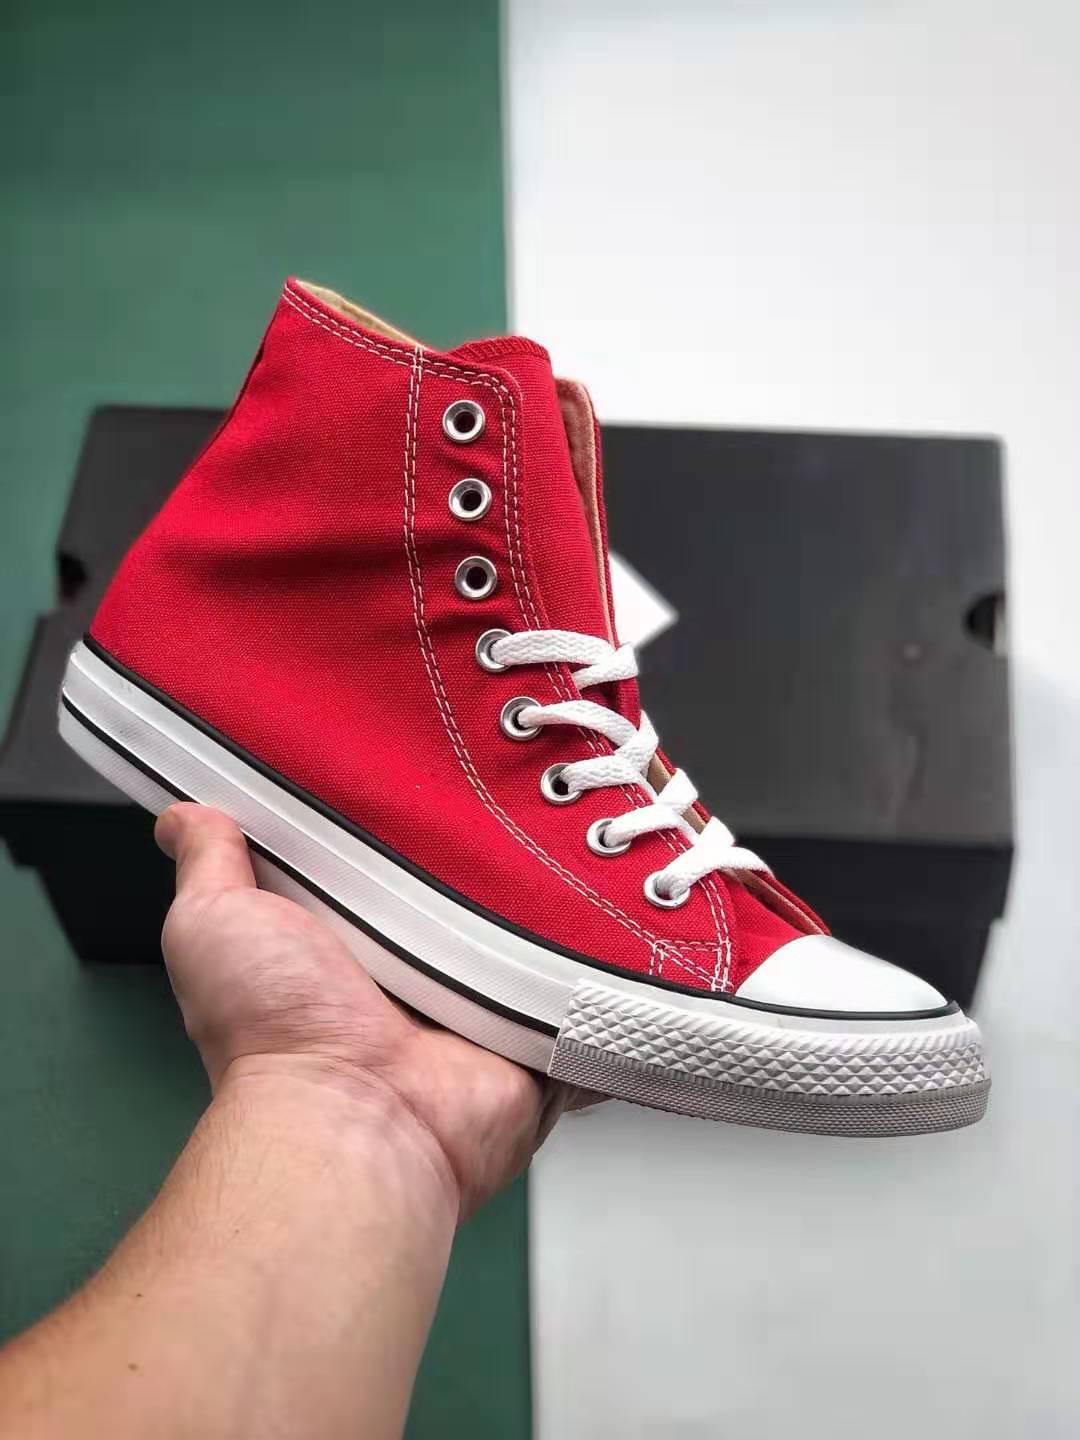 Converse Chuck Taylor All Star 101013 - Classic Sneakers & Footwear